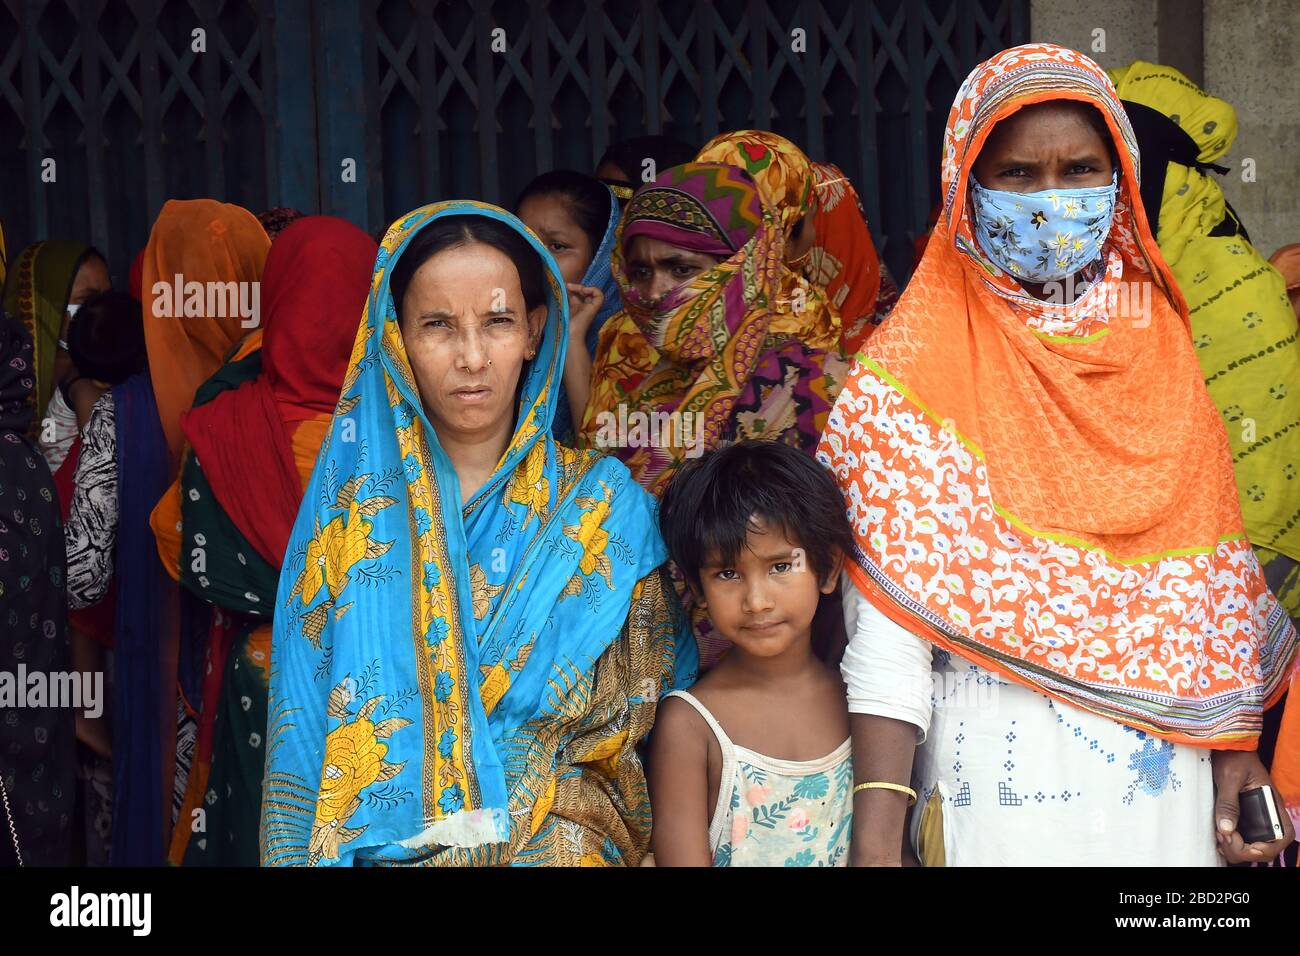 Bangladeshi homeless people wait in a queue to get aid during the nationwide lockdown imposed as a measure to prevent the spread of COVID-19, in Dhaka Stock Photo